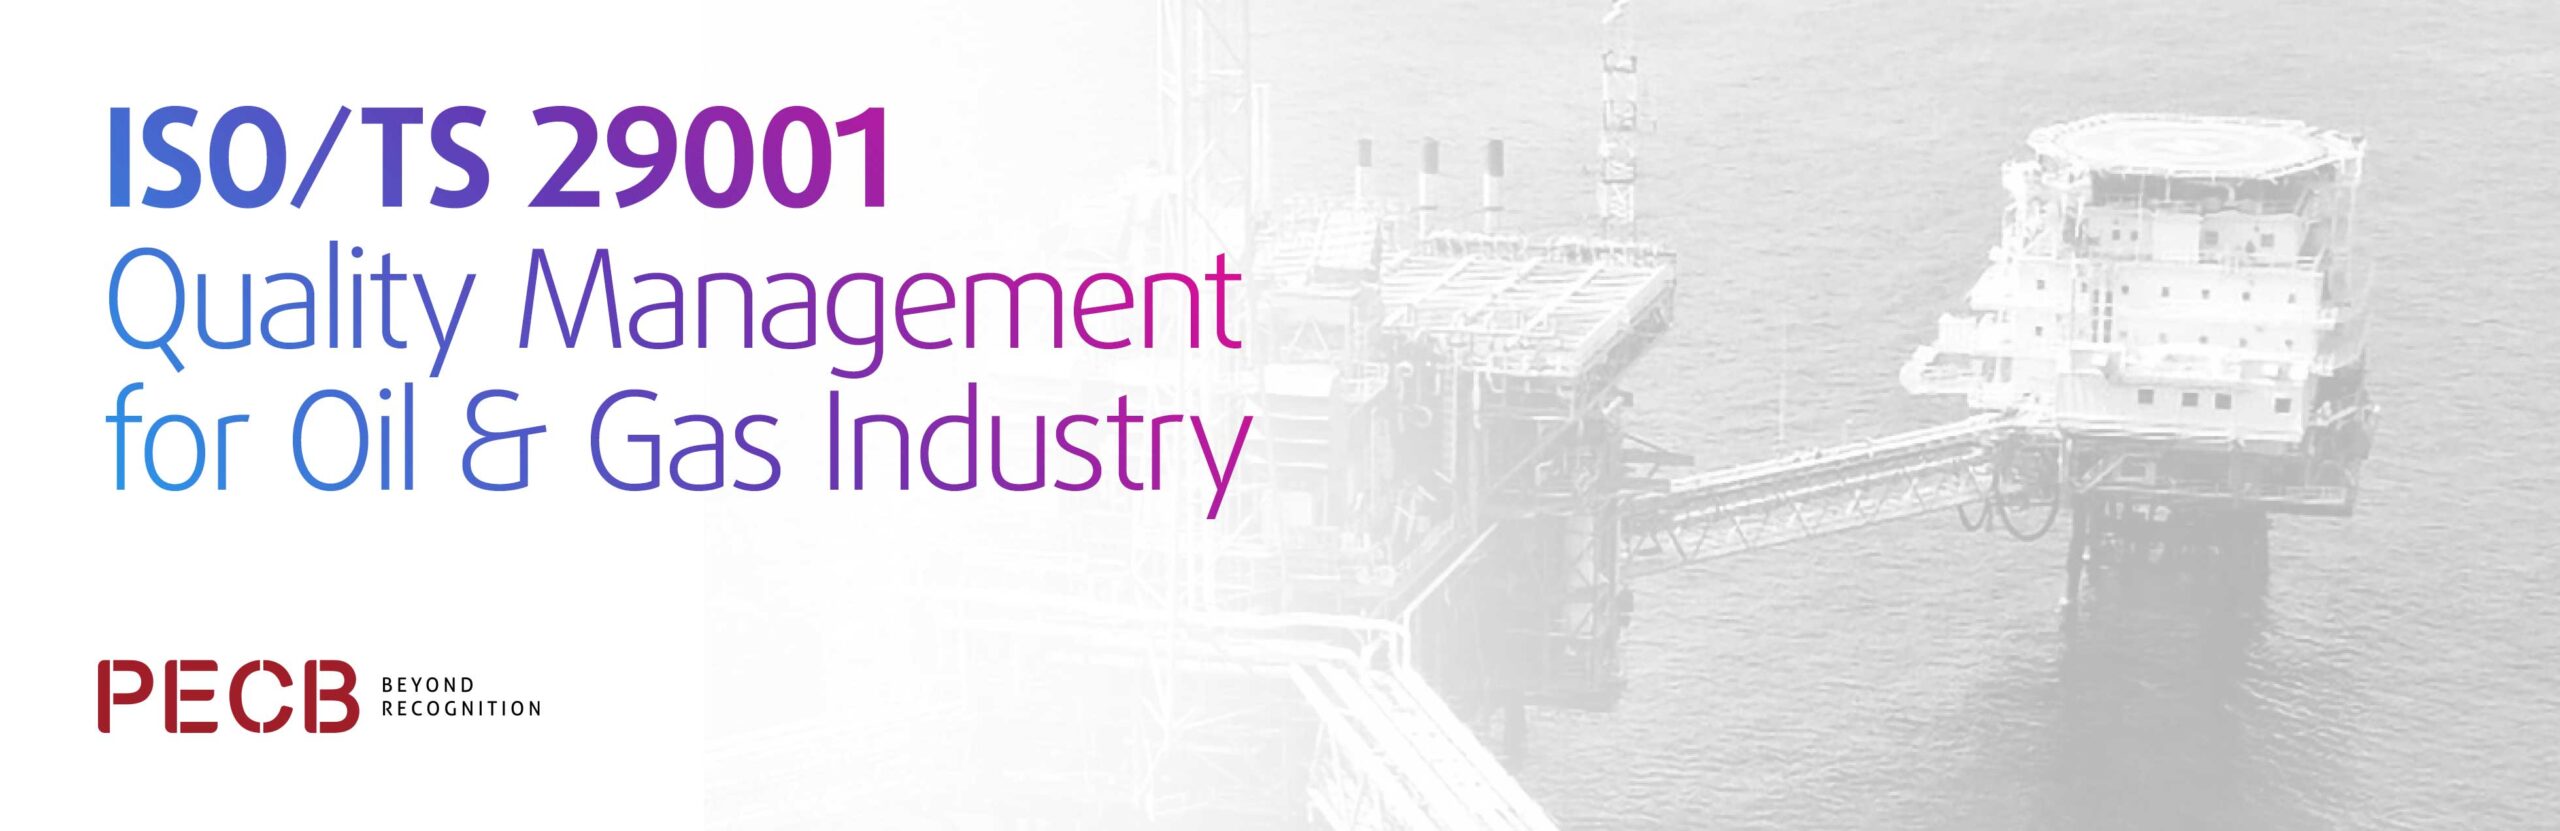 iso/ts 29001 quality management for oil and gas industry